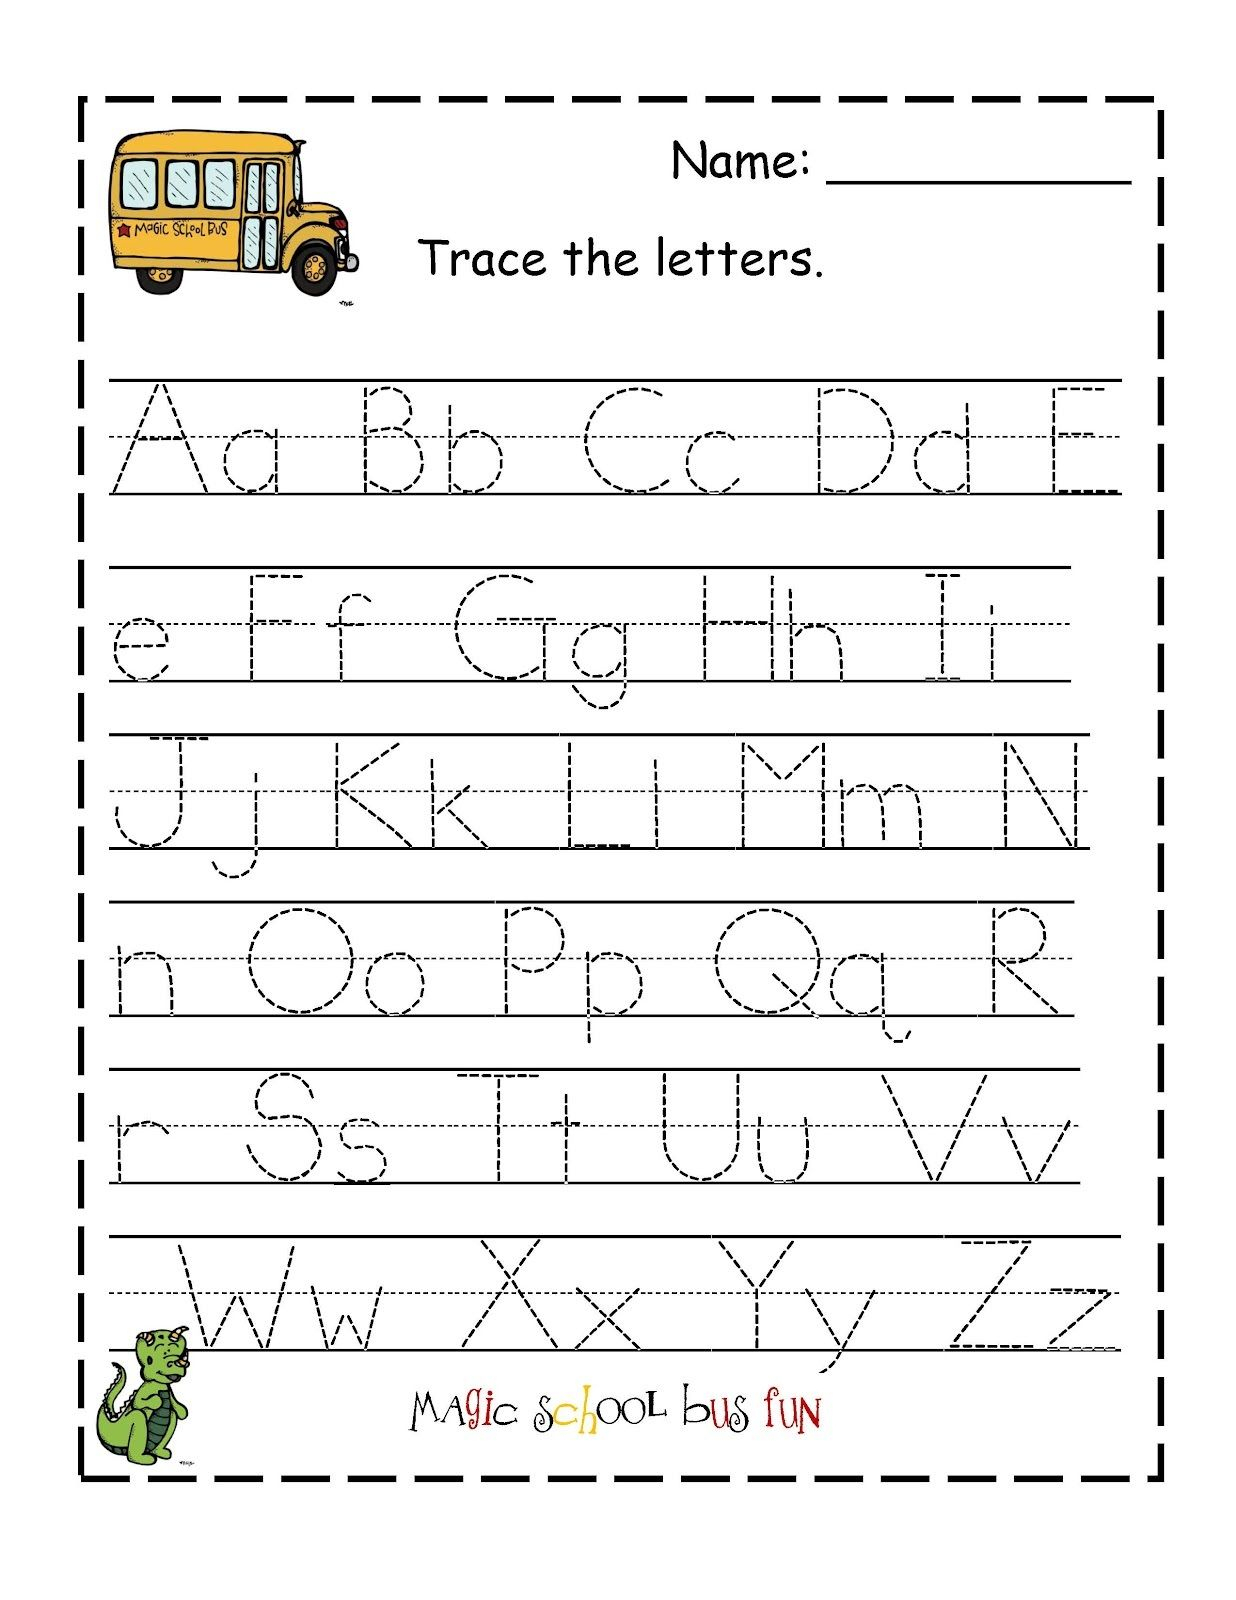 Worksheets : Writing Alphabet Letters Worksheets Chinese throughout Trace The Letter S Worksheets For Preschool